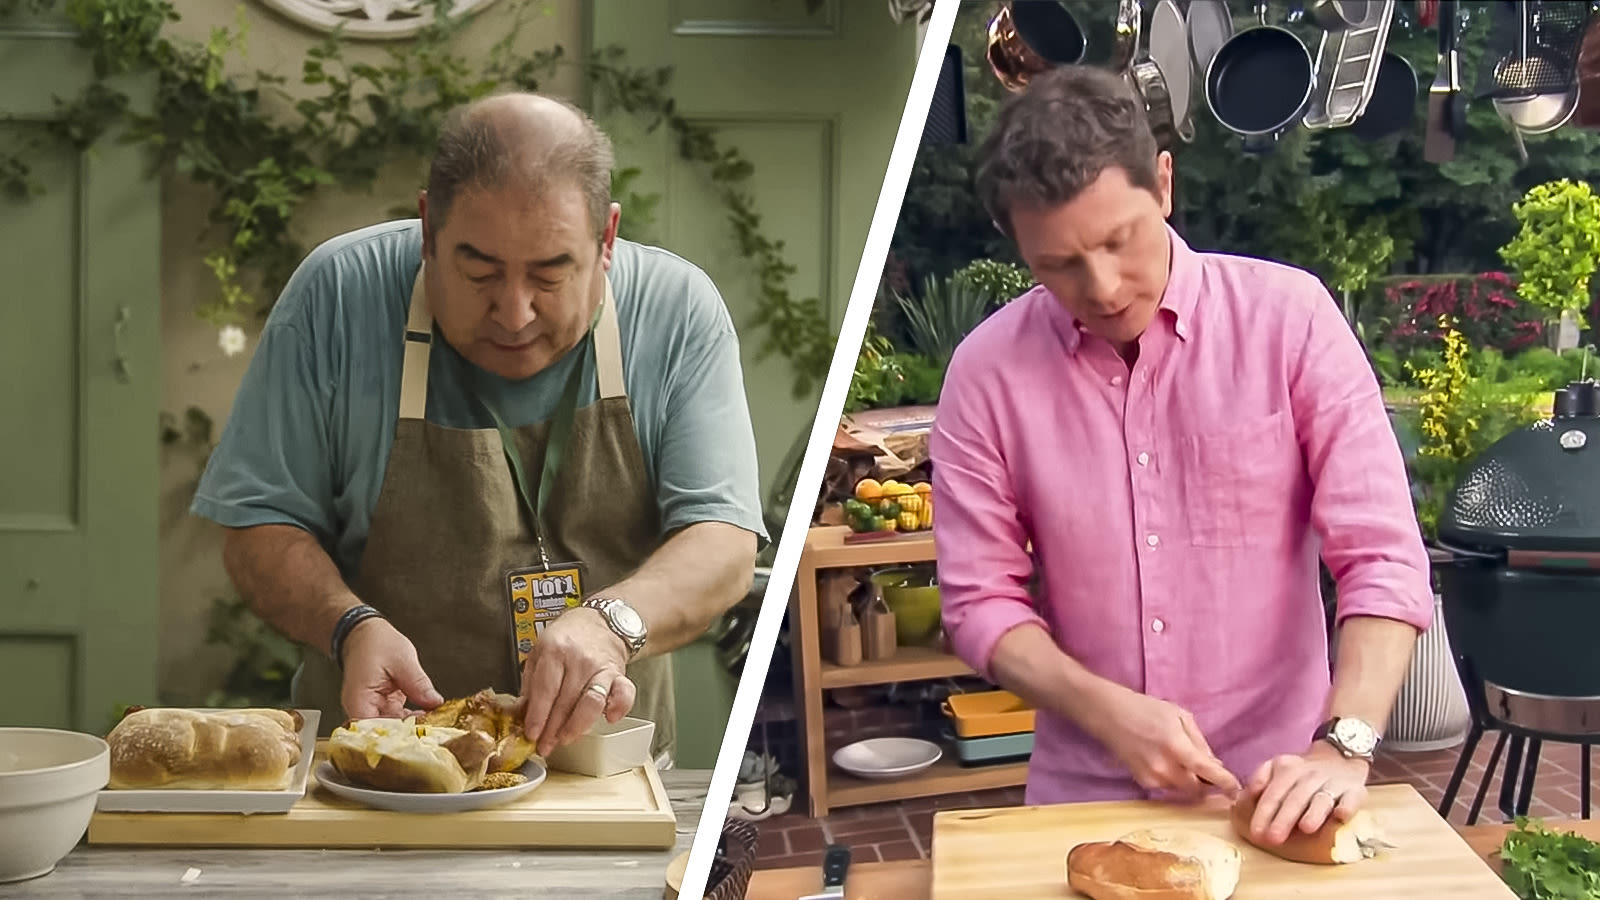 Bobby Flay Vs Emeril Lagasse: A Clash Of Culinary Styles